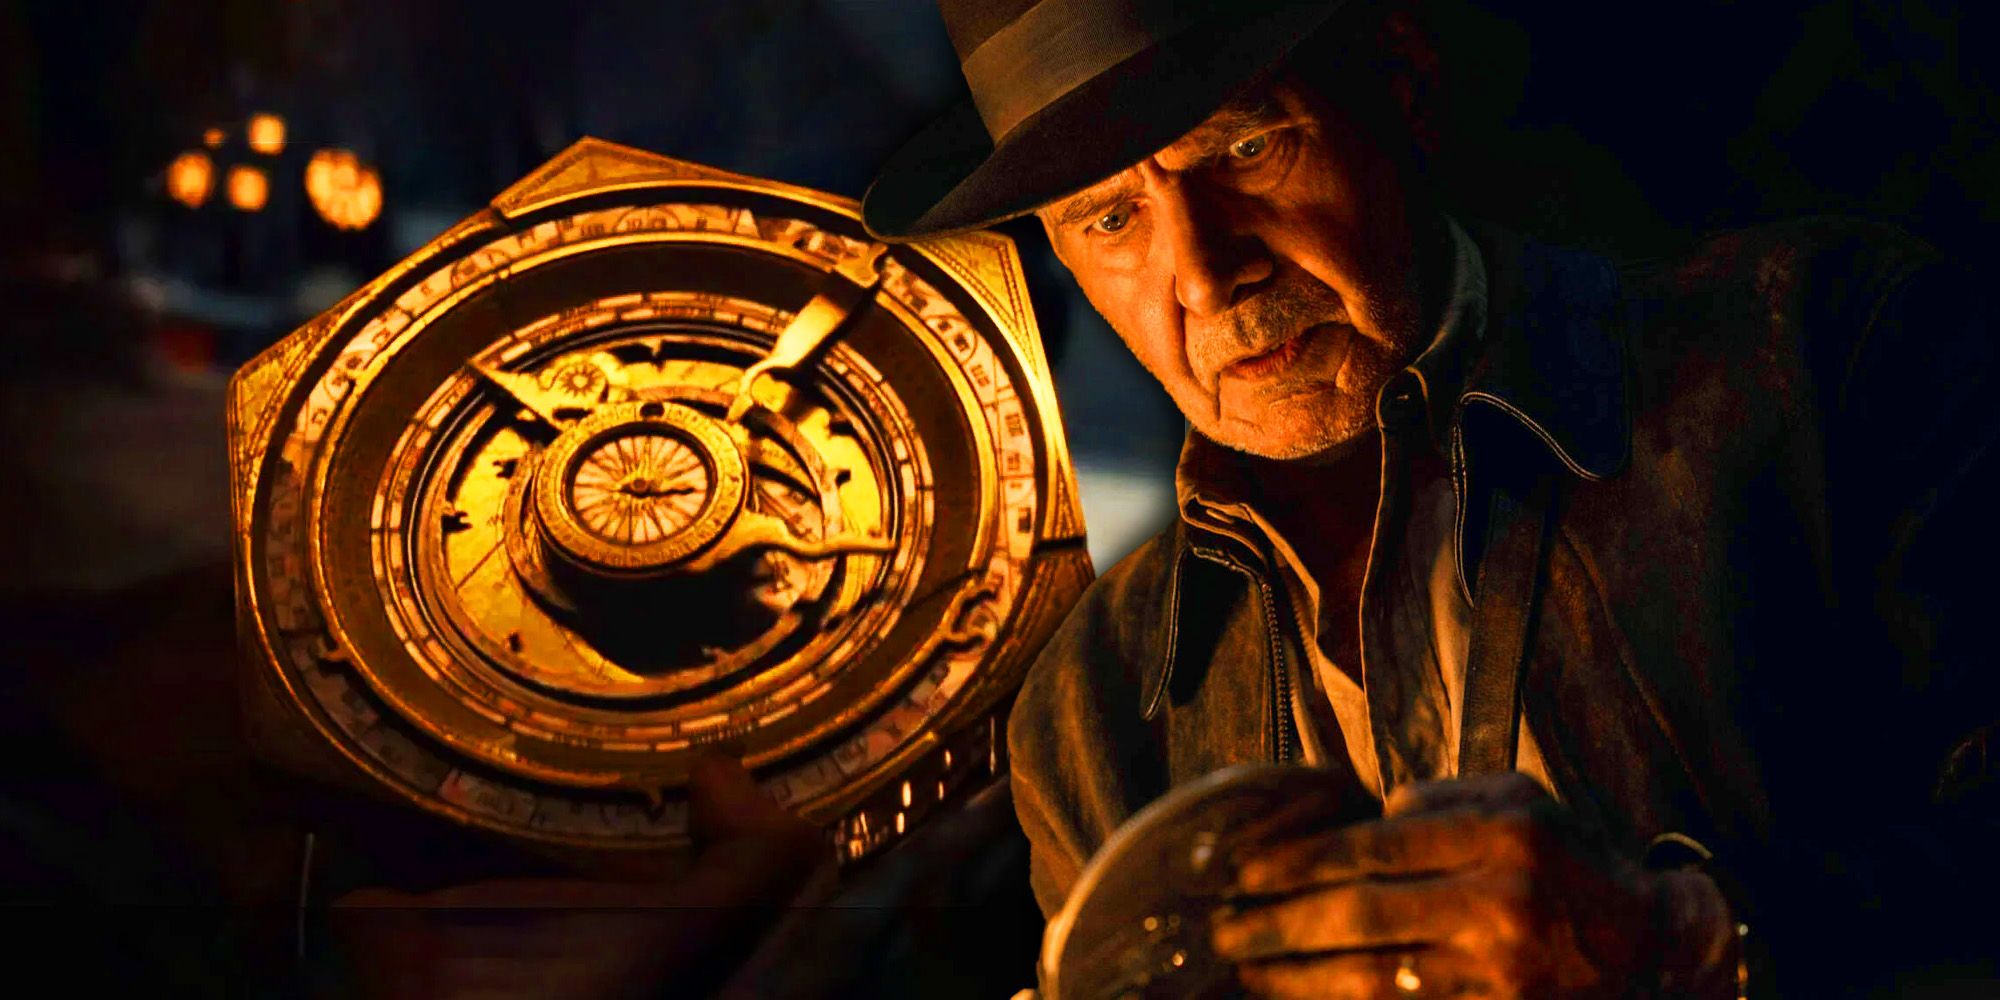 Who plays Archimedes in Indiana Jones and the Dial of Destiny?